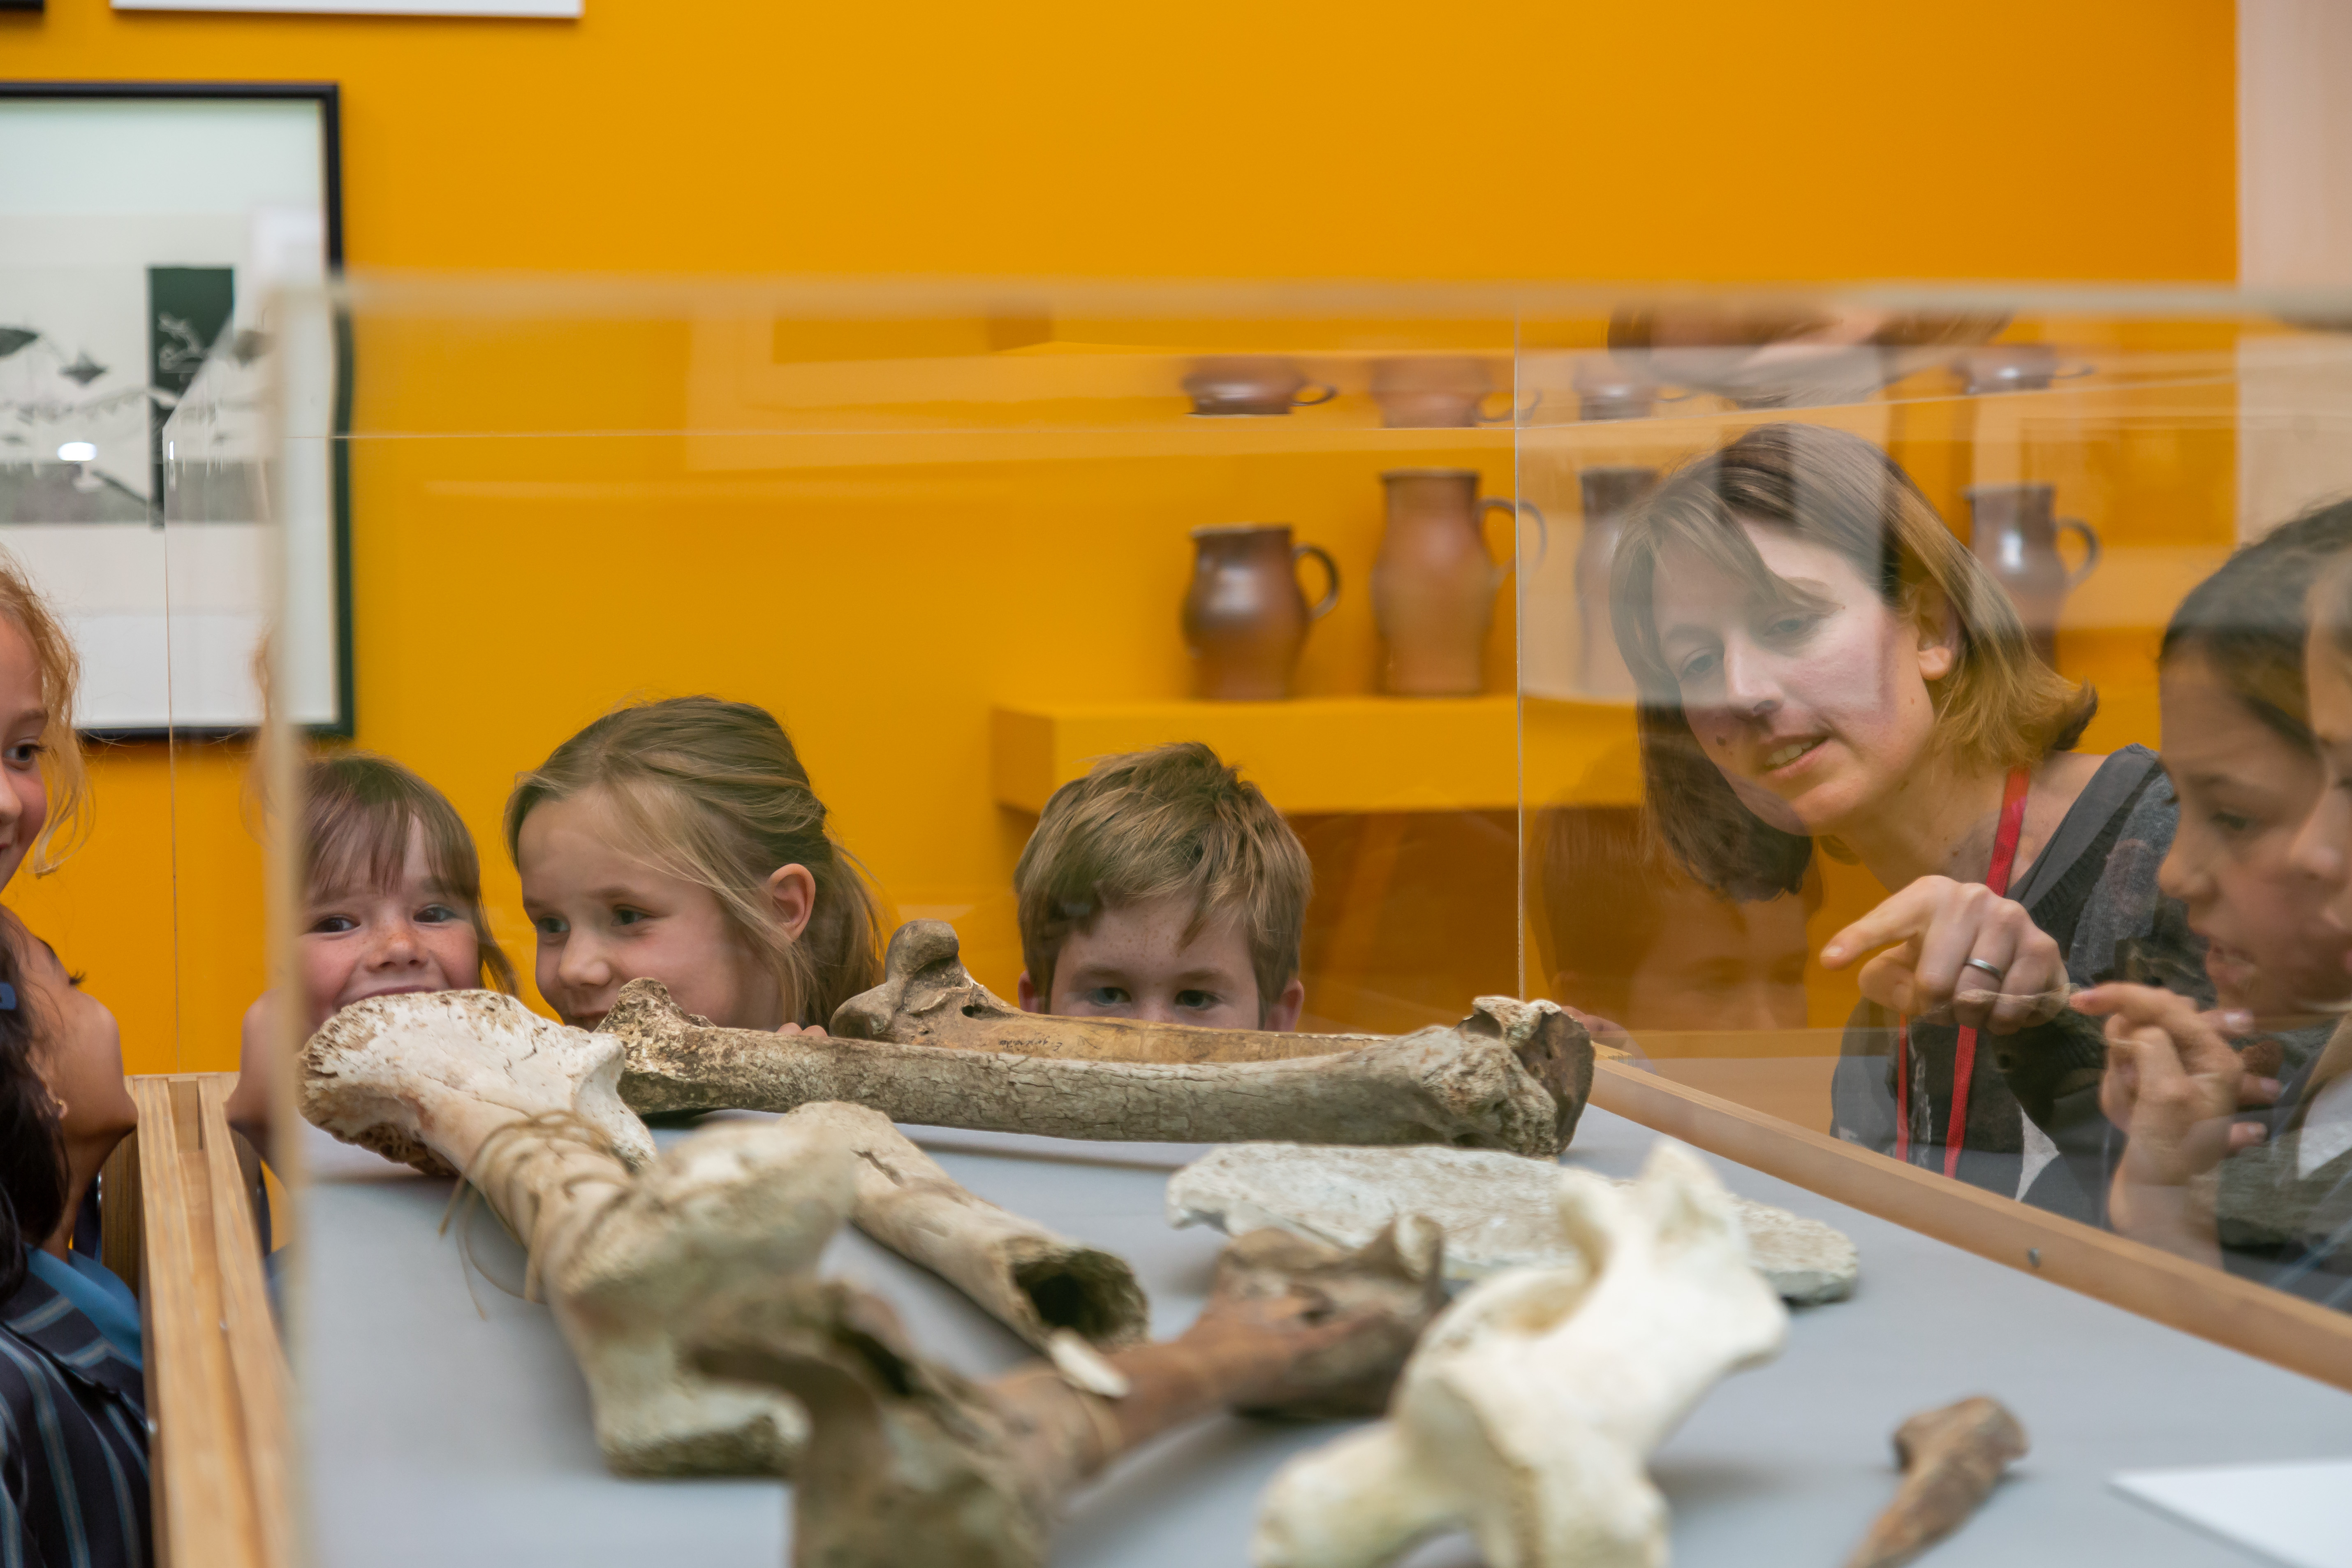 One of our educators, Becky talks about the moa bones to a group of school childre